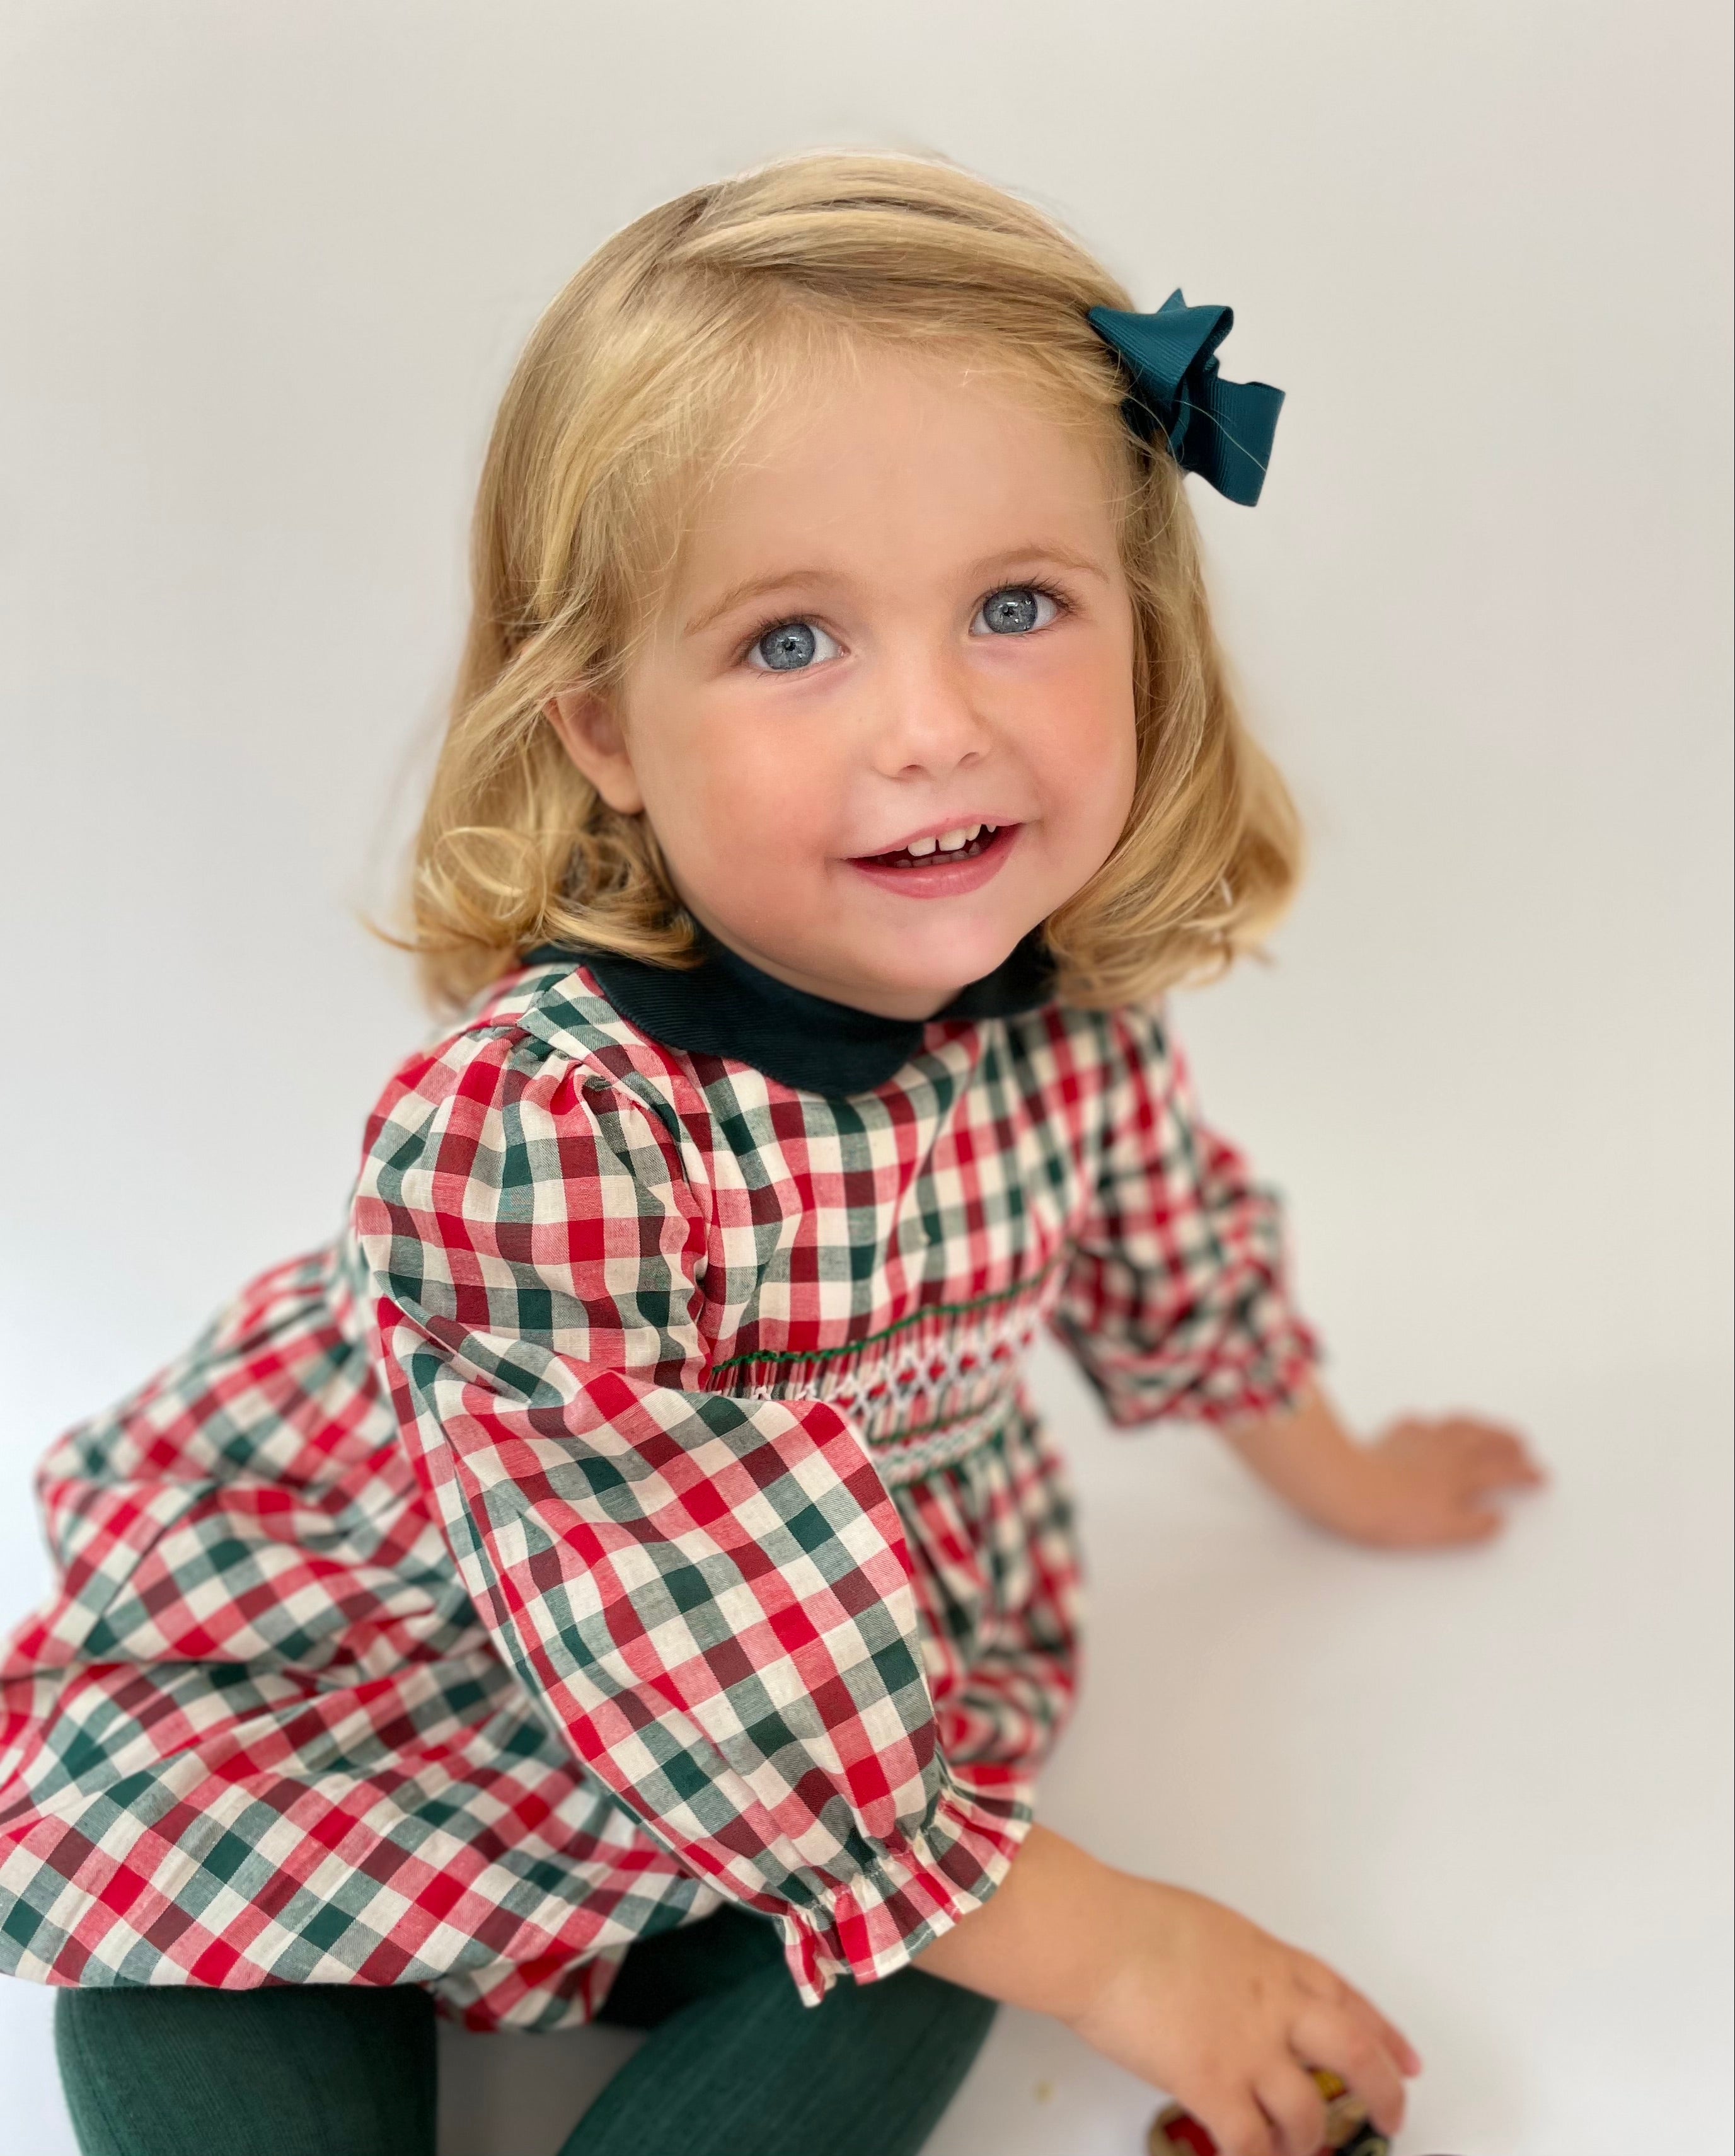 Hand smocked romper collection image for Autumn for Lallie London smocked dresses and hand smocked rompers. Smocked dresses for all occasions designed in london. Traditional children's clothes. 